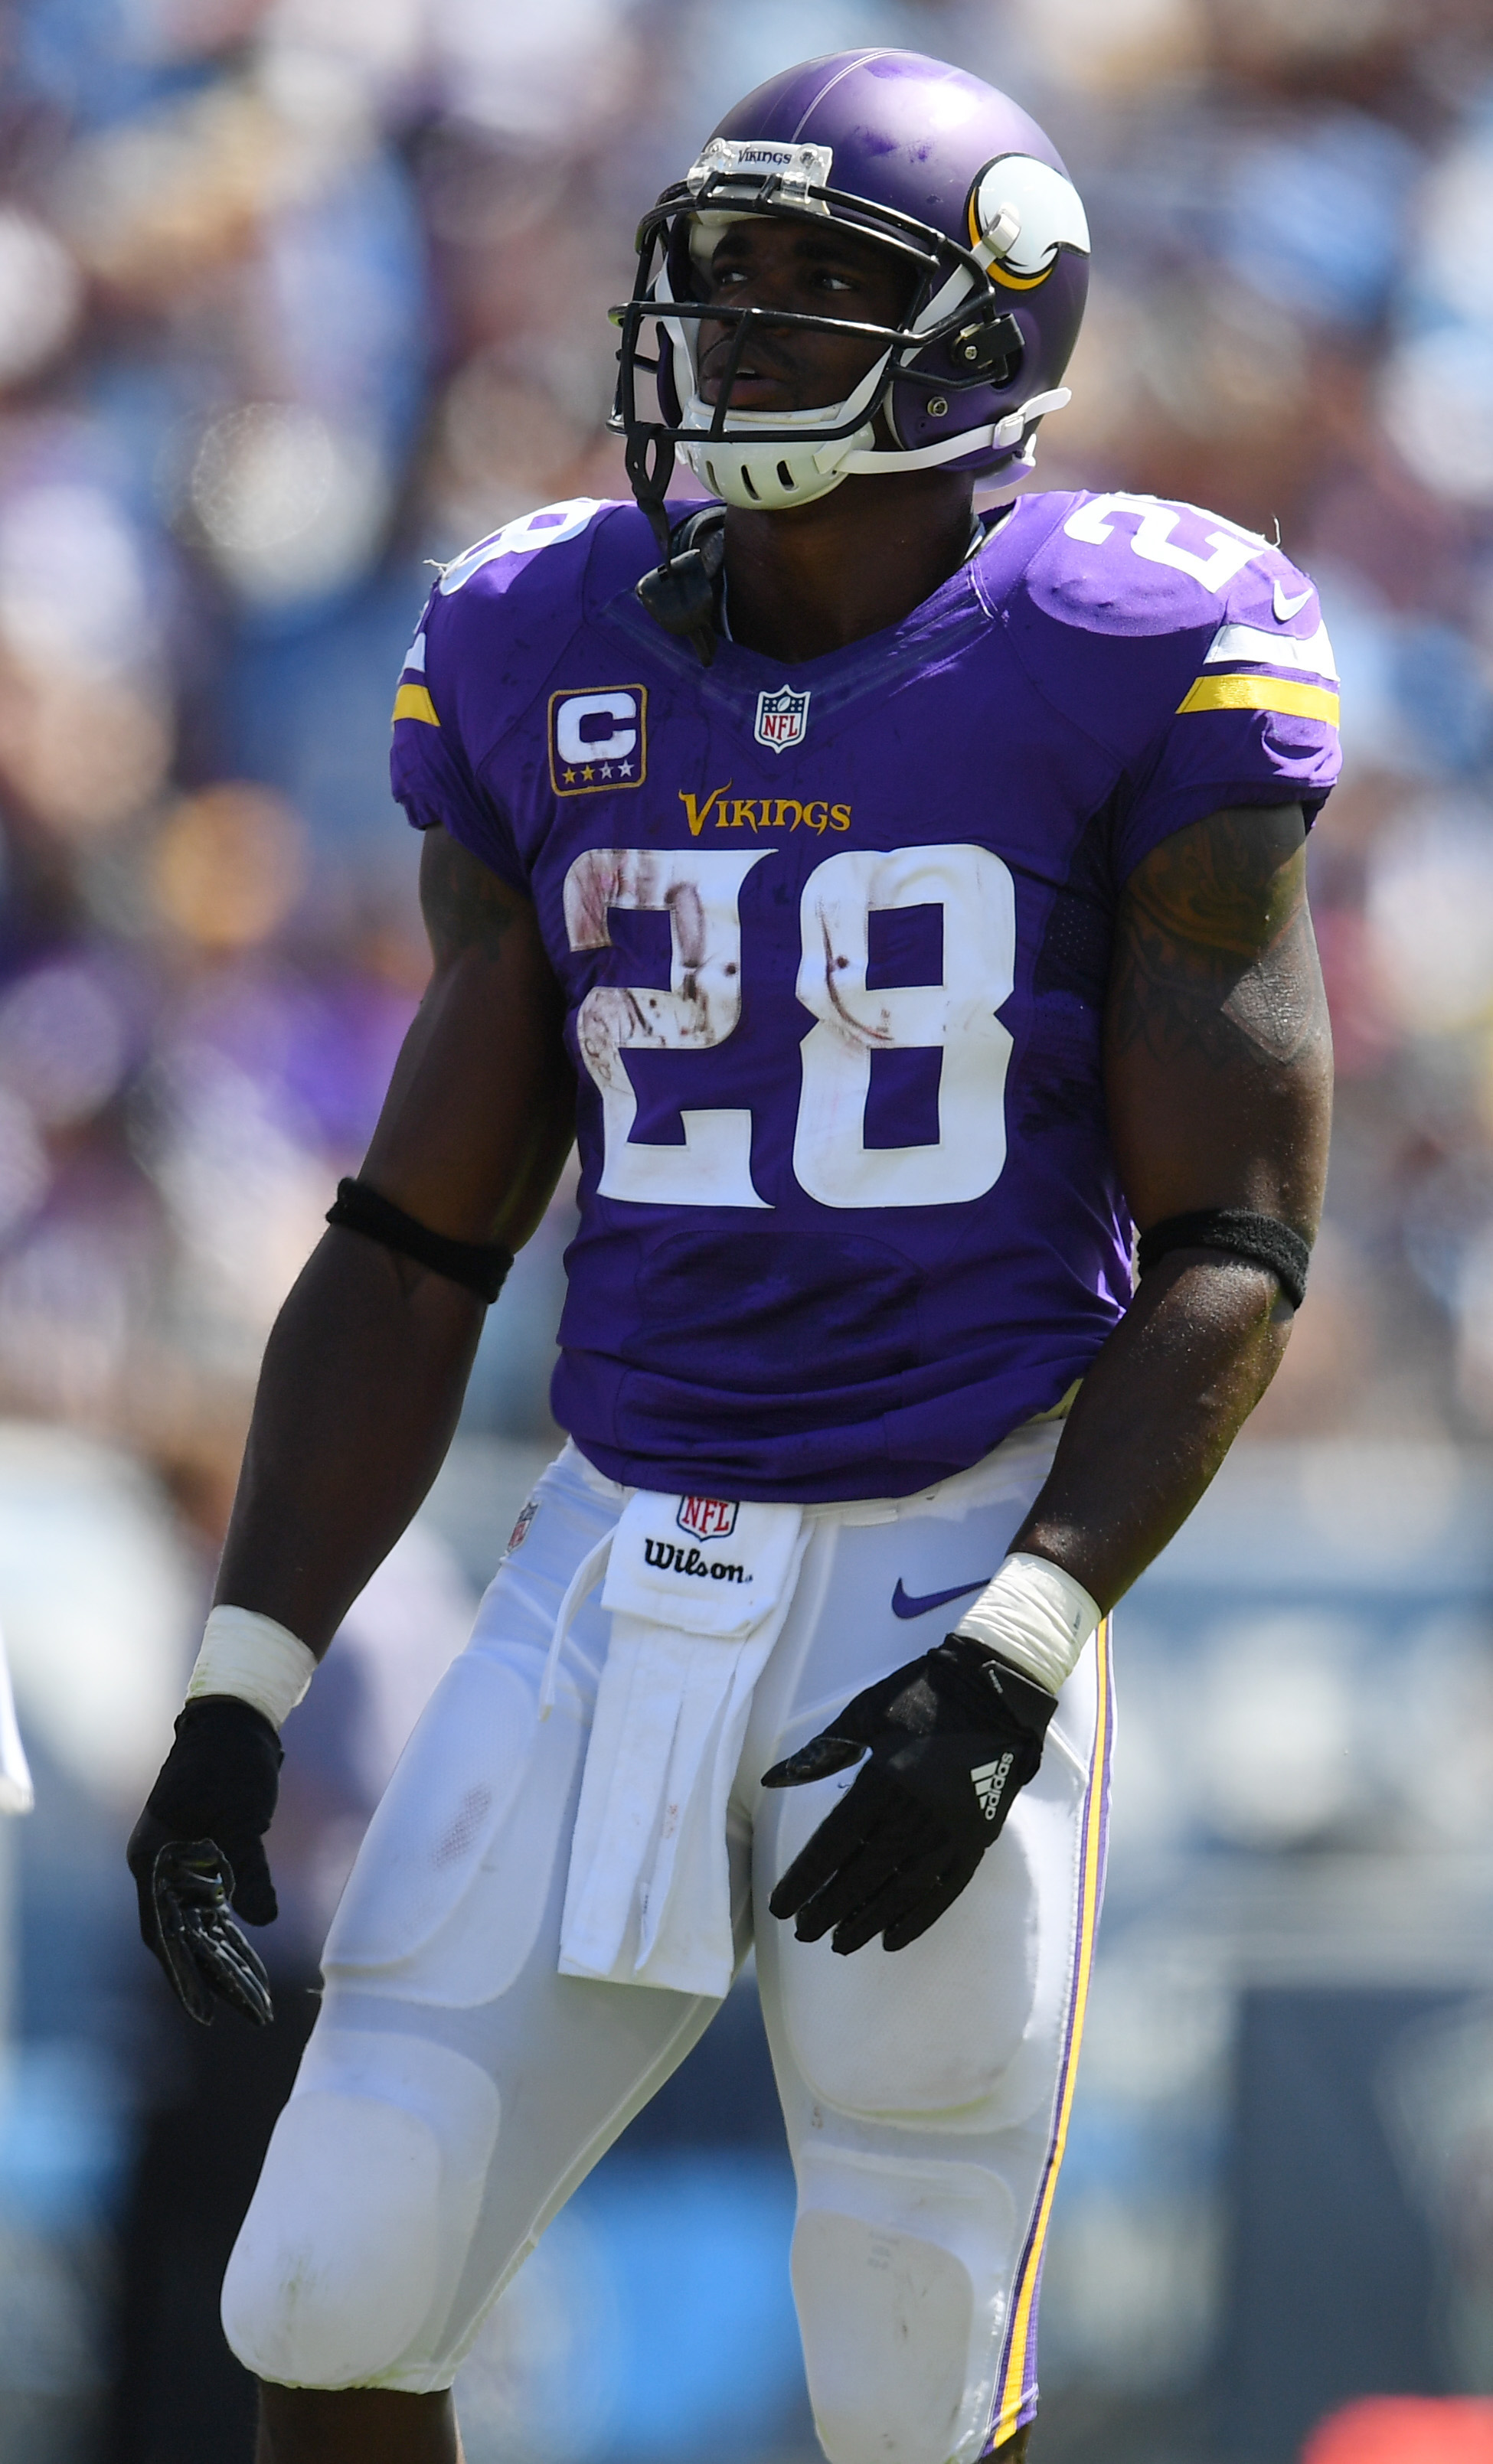 Adrian Peterson To Miss Rest Of Season?